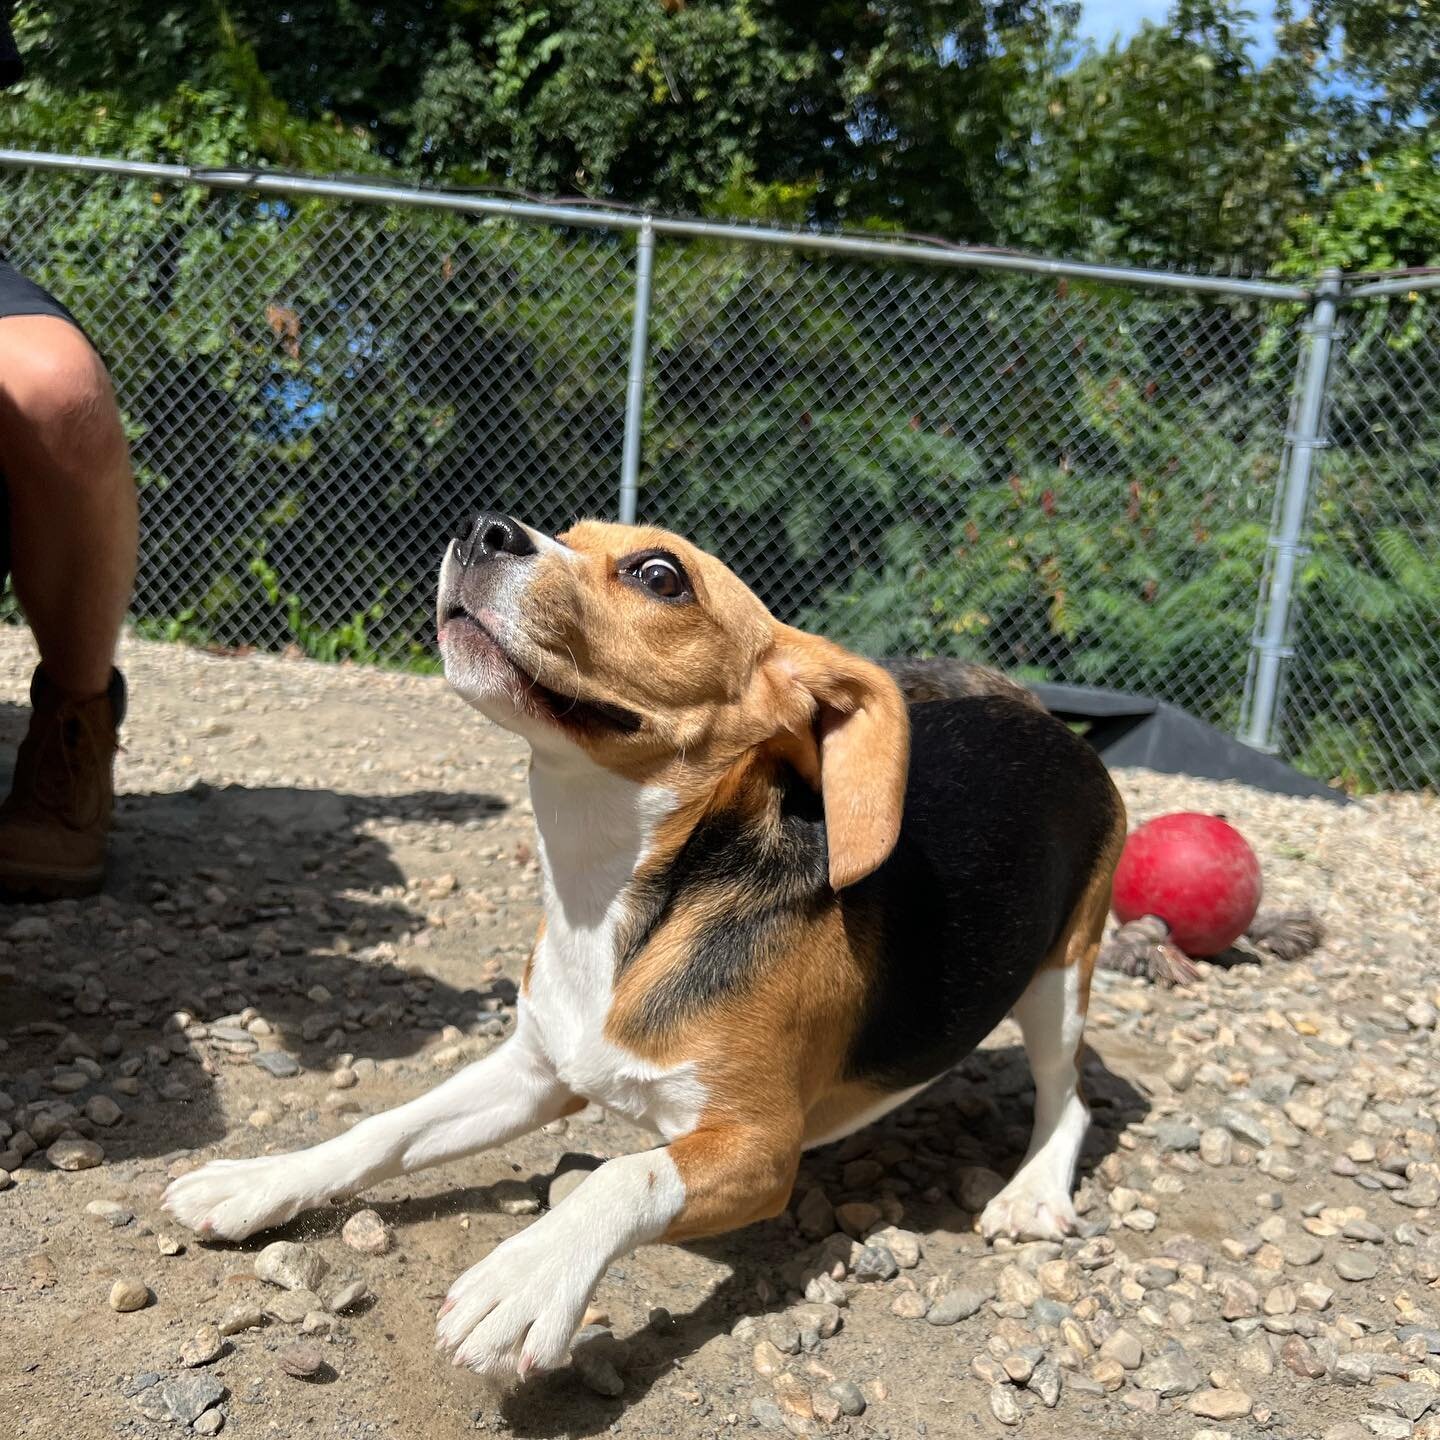 Snapshots from our small group today! Can you tell out new beagle friend, Roxy, is having a blast?! That girl loves to zoom around 🥰🥰

#saturdaysareforthedogs #zoomies #dogsplaying #labordayweekend #dogsjustwannahavefun #funinthesun #sunsouttongues